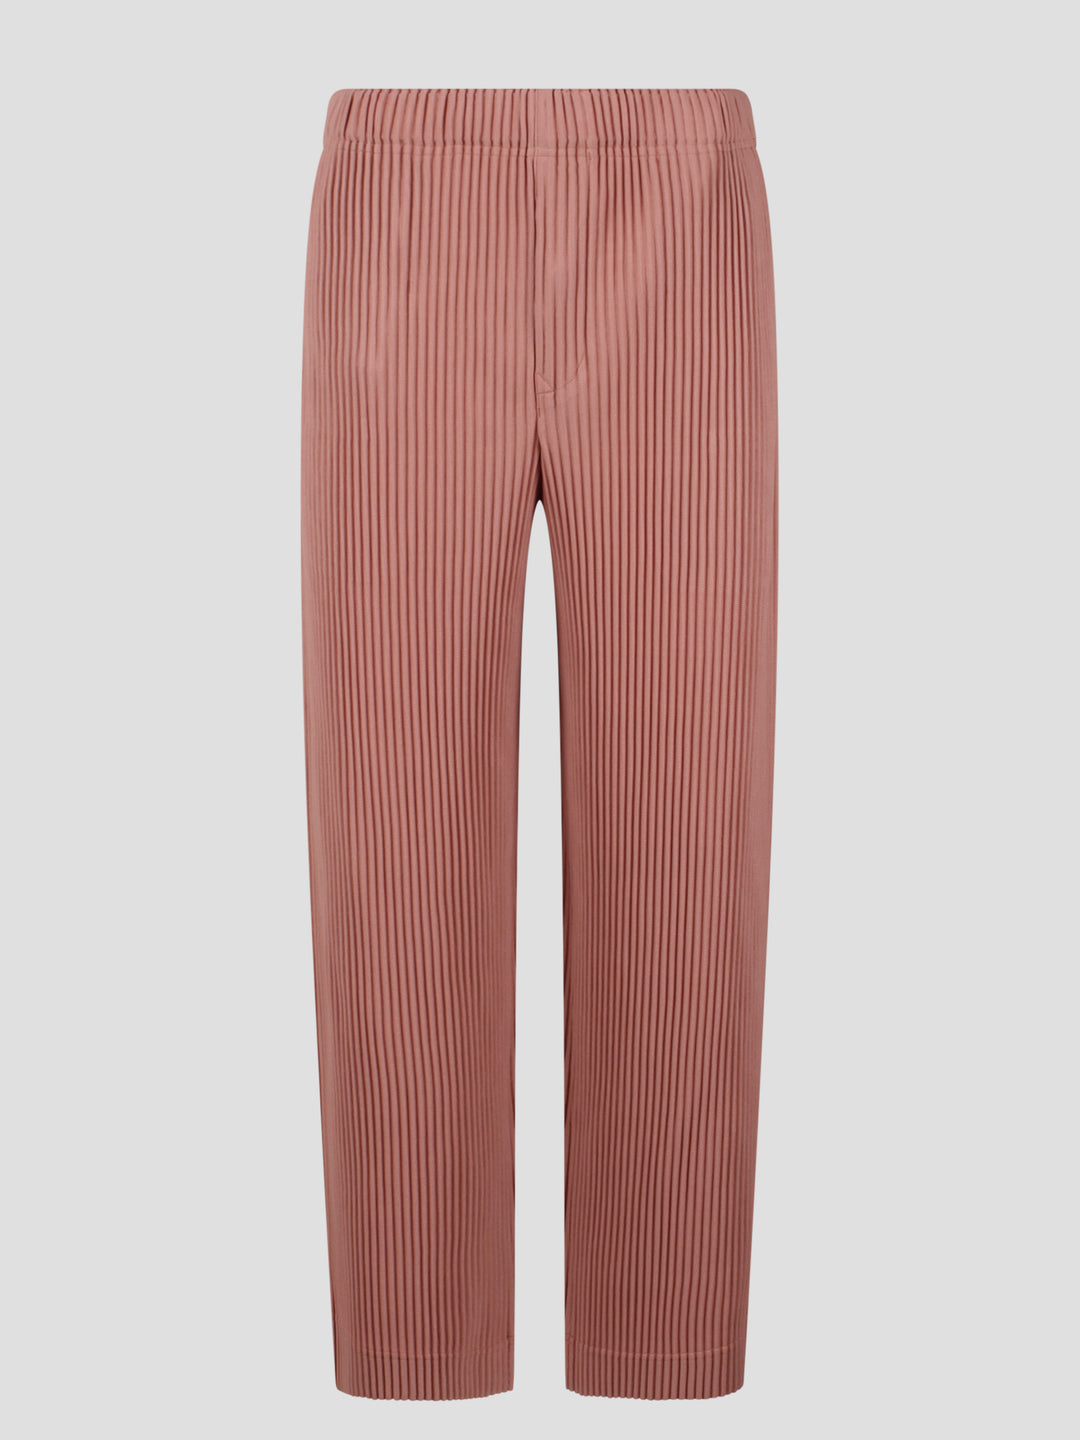 Mc march trousers